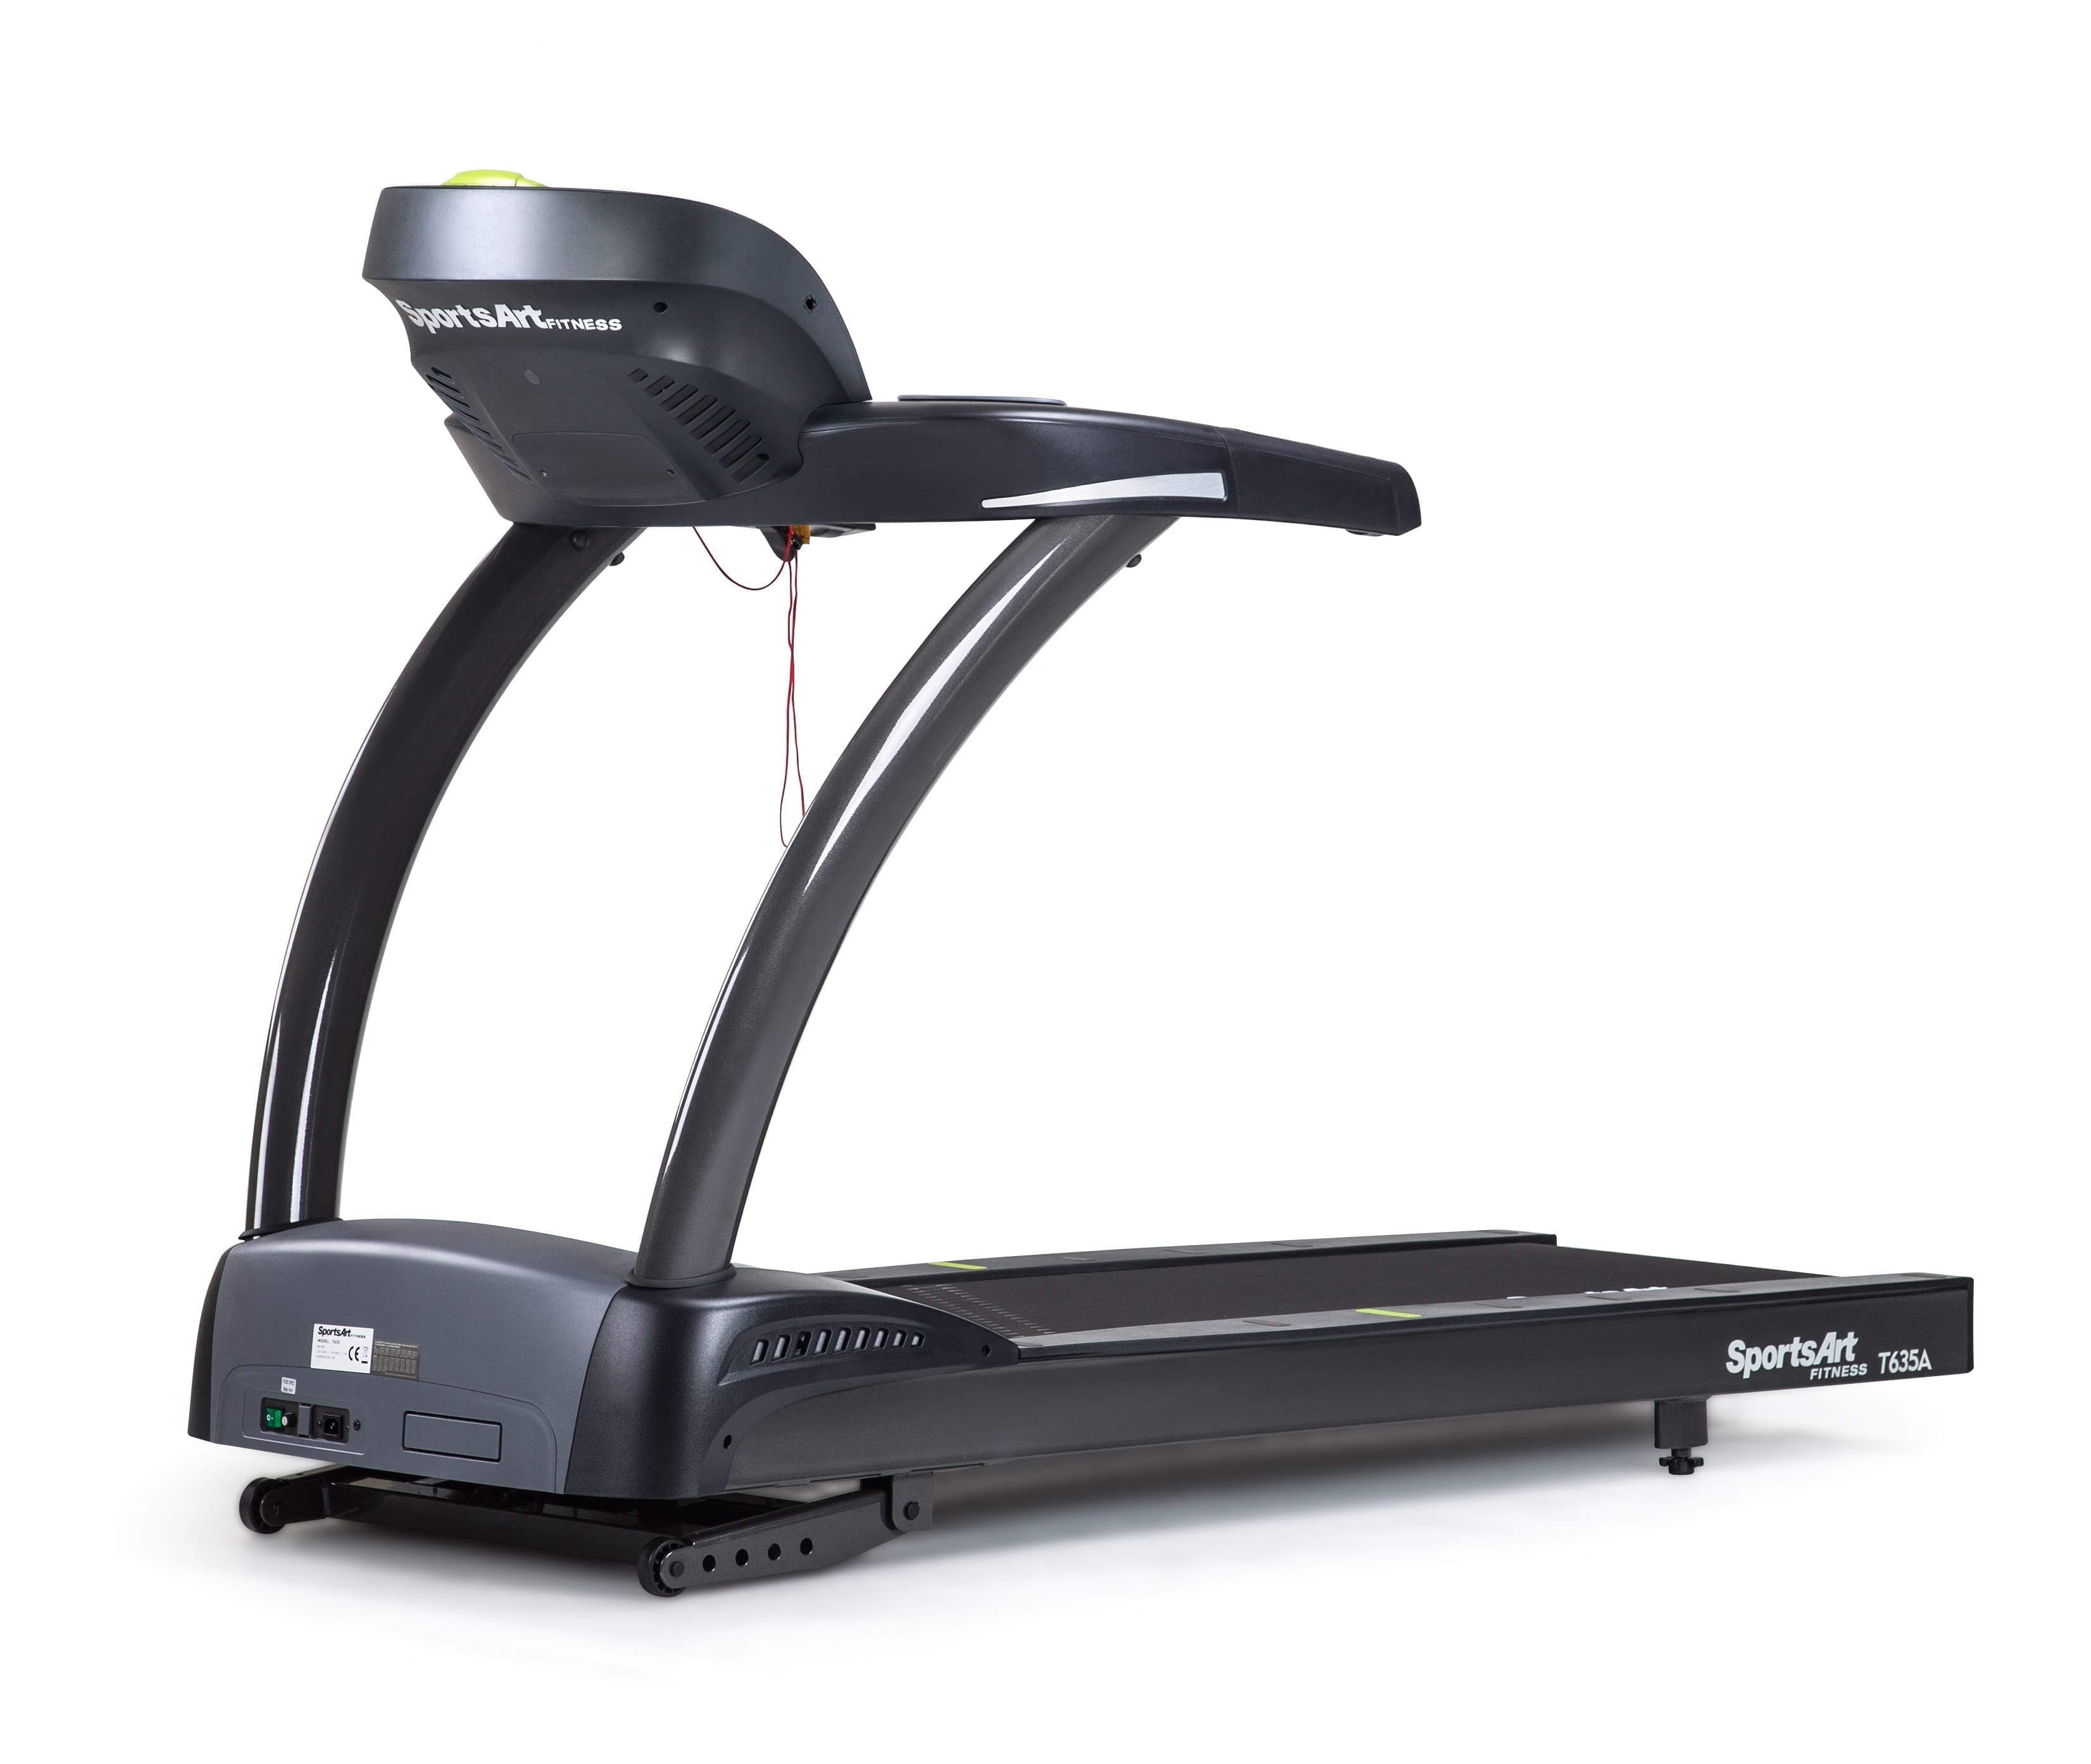 SportsArt Foundation Ac Motor Treadmill T635A front facing side angle view